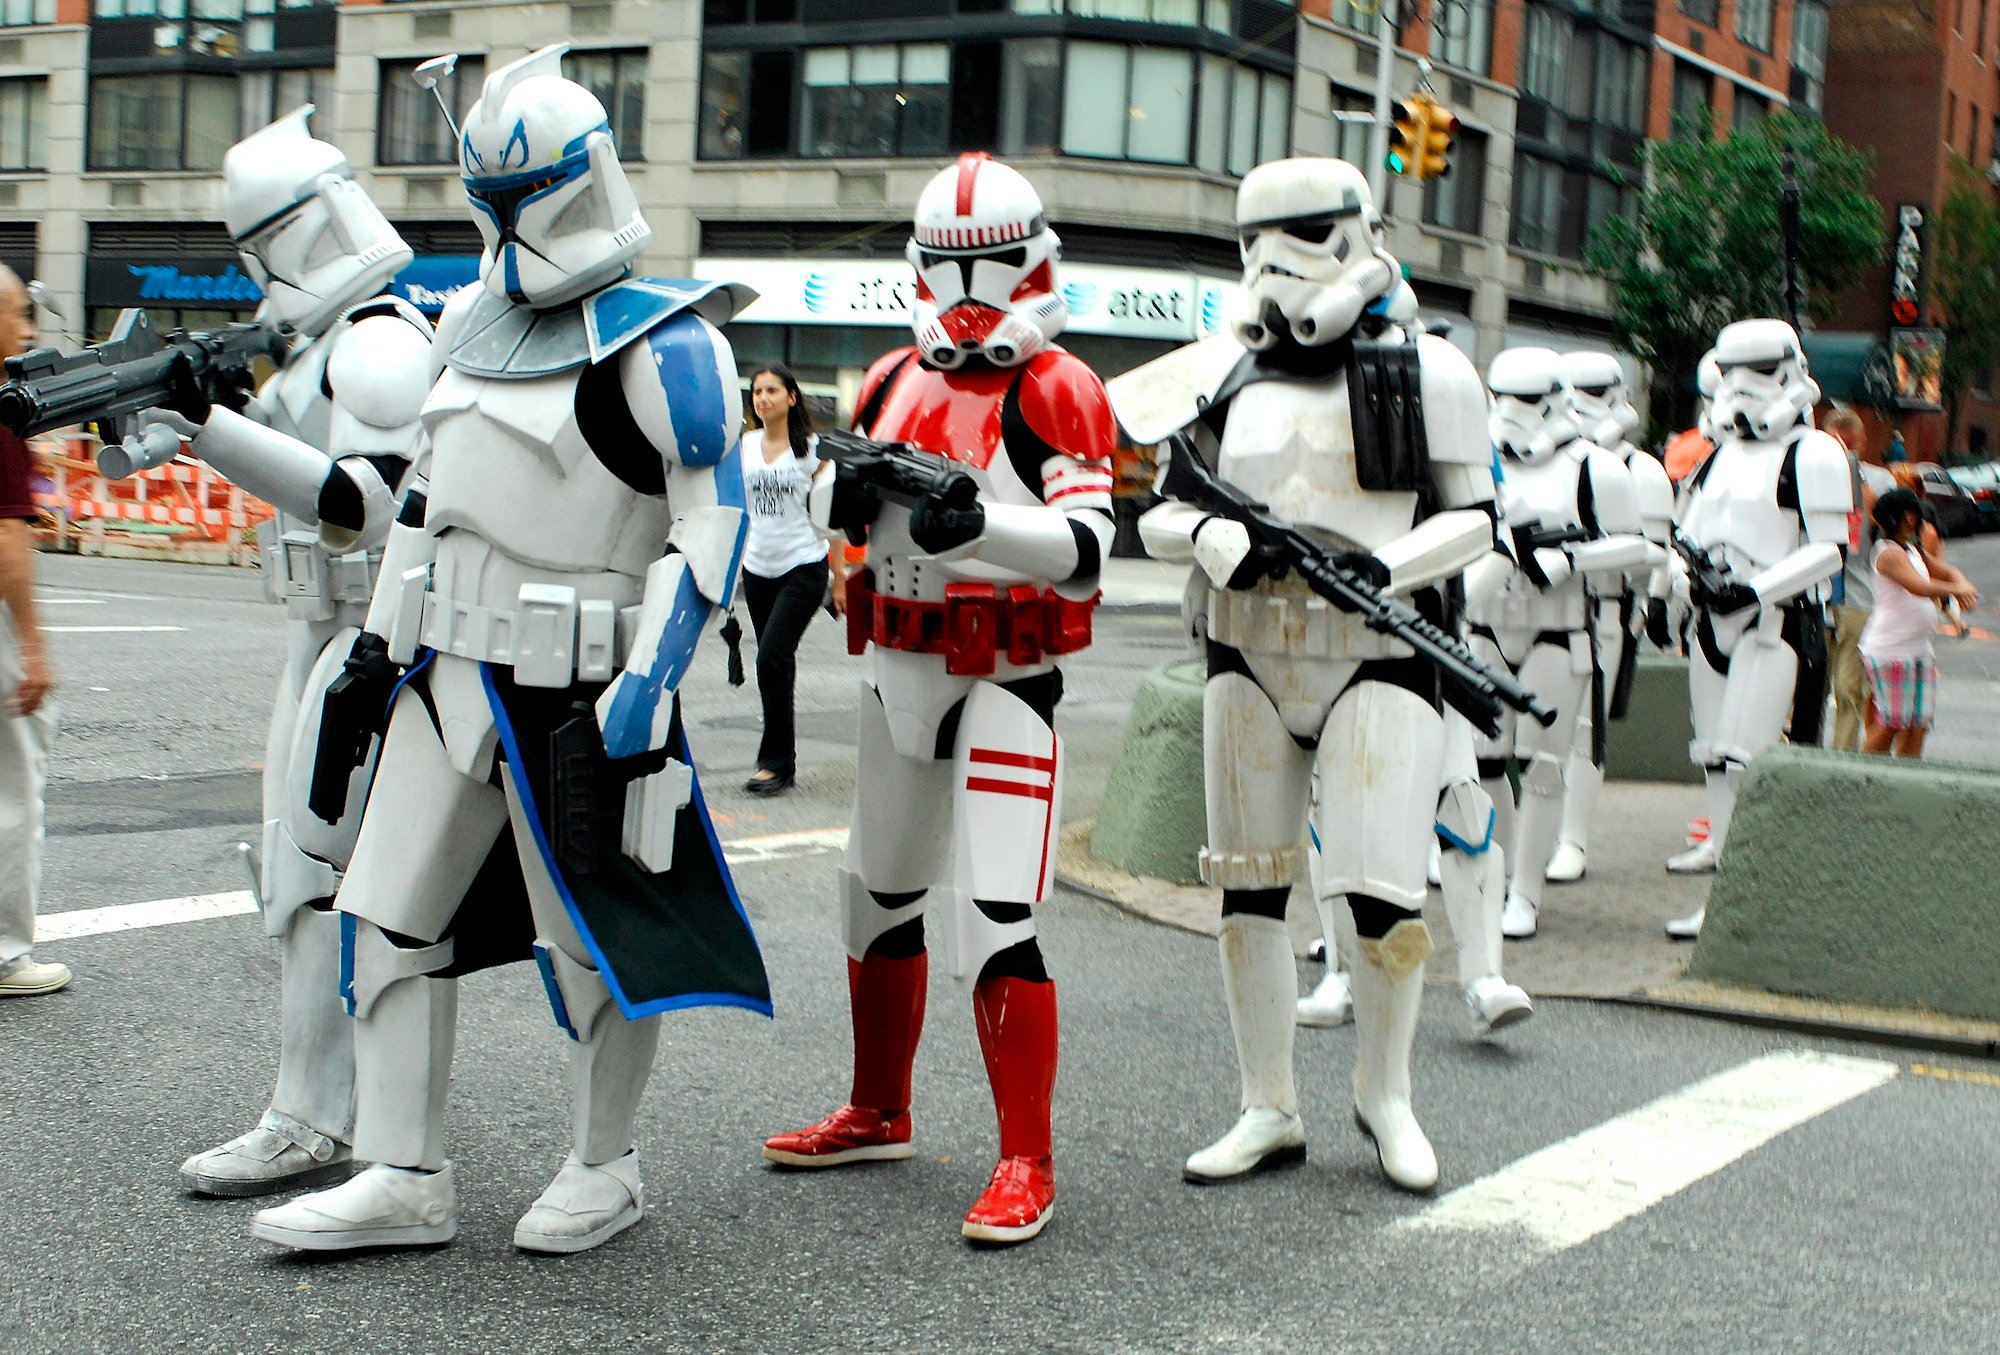 Actors portraying Stormtroopers and Clone Troopers